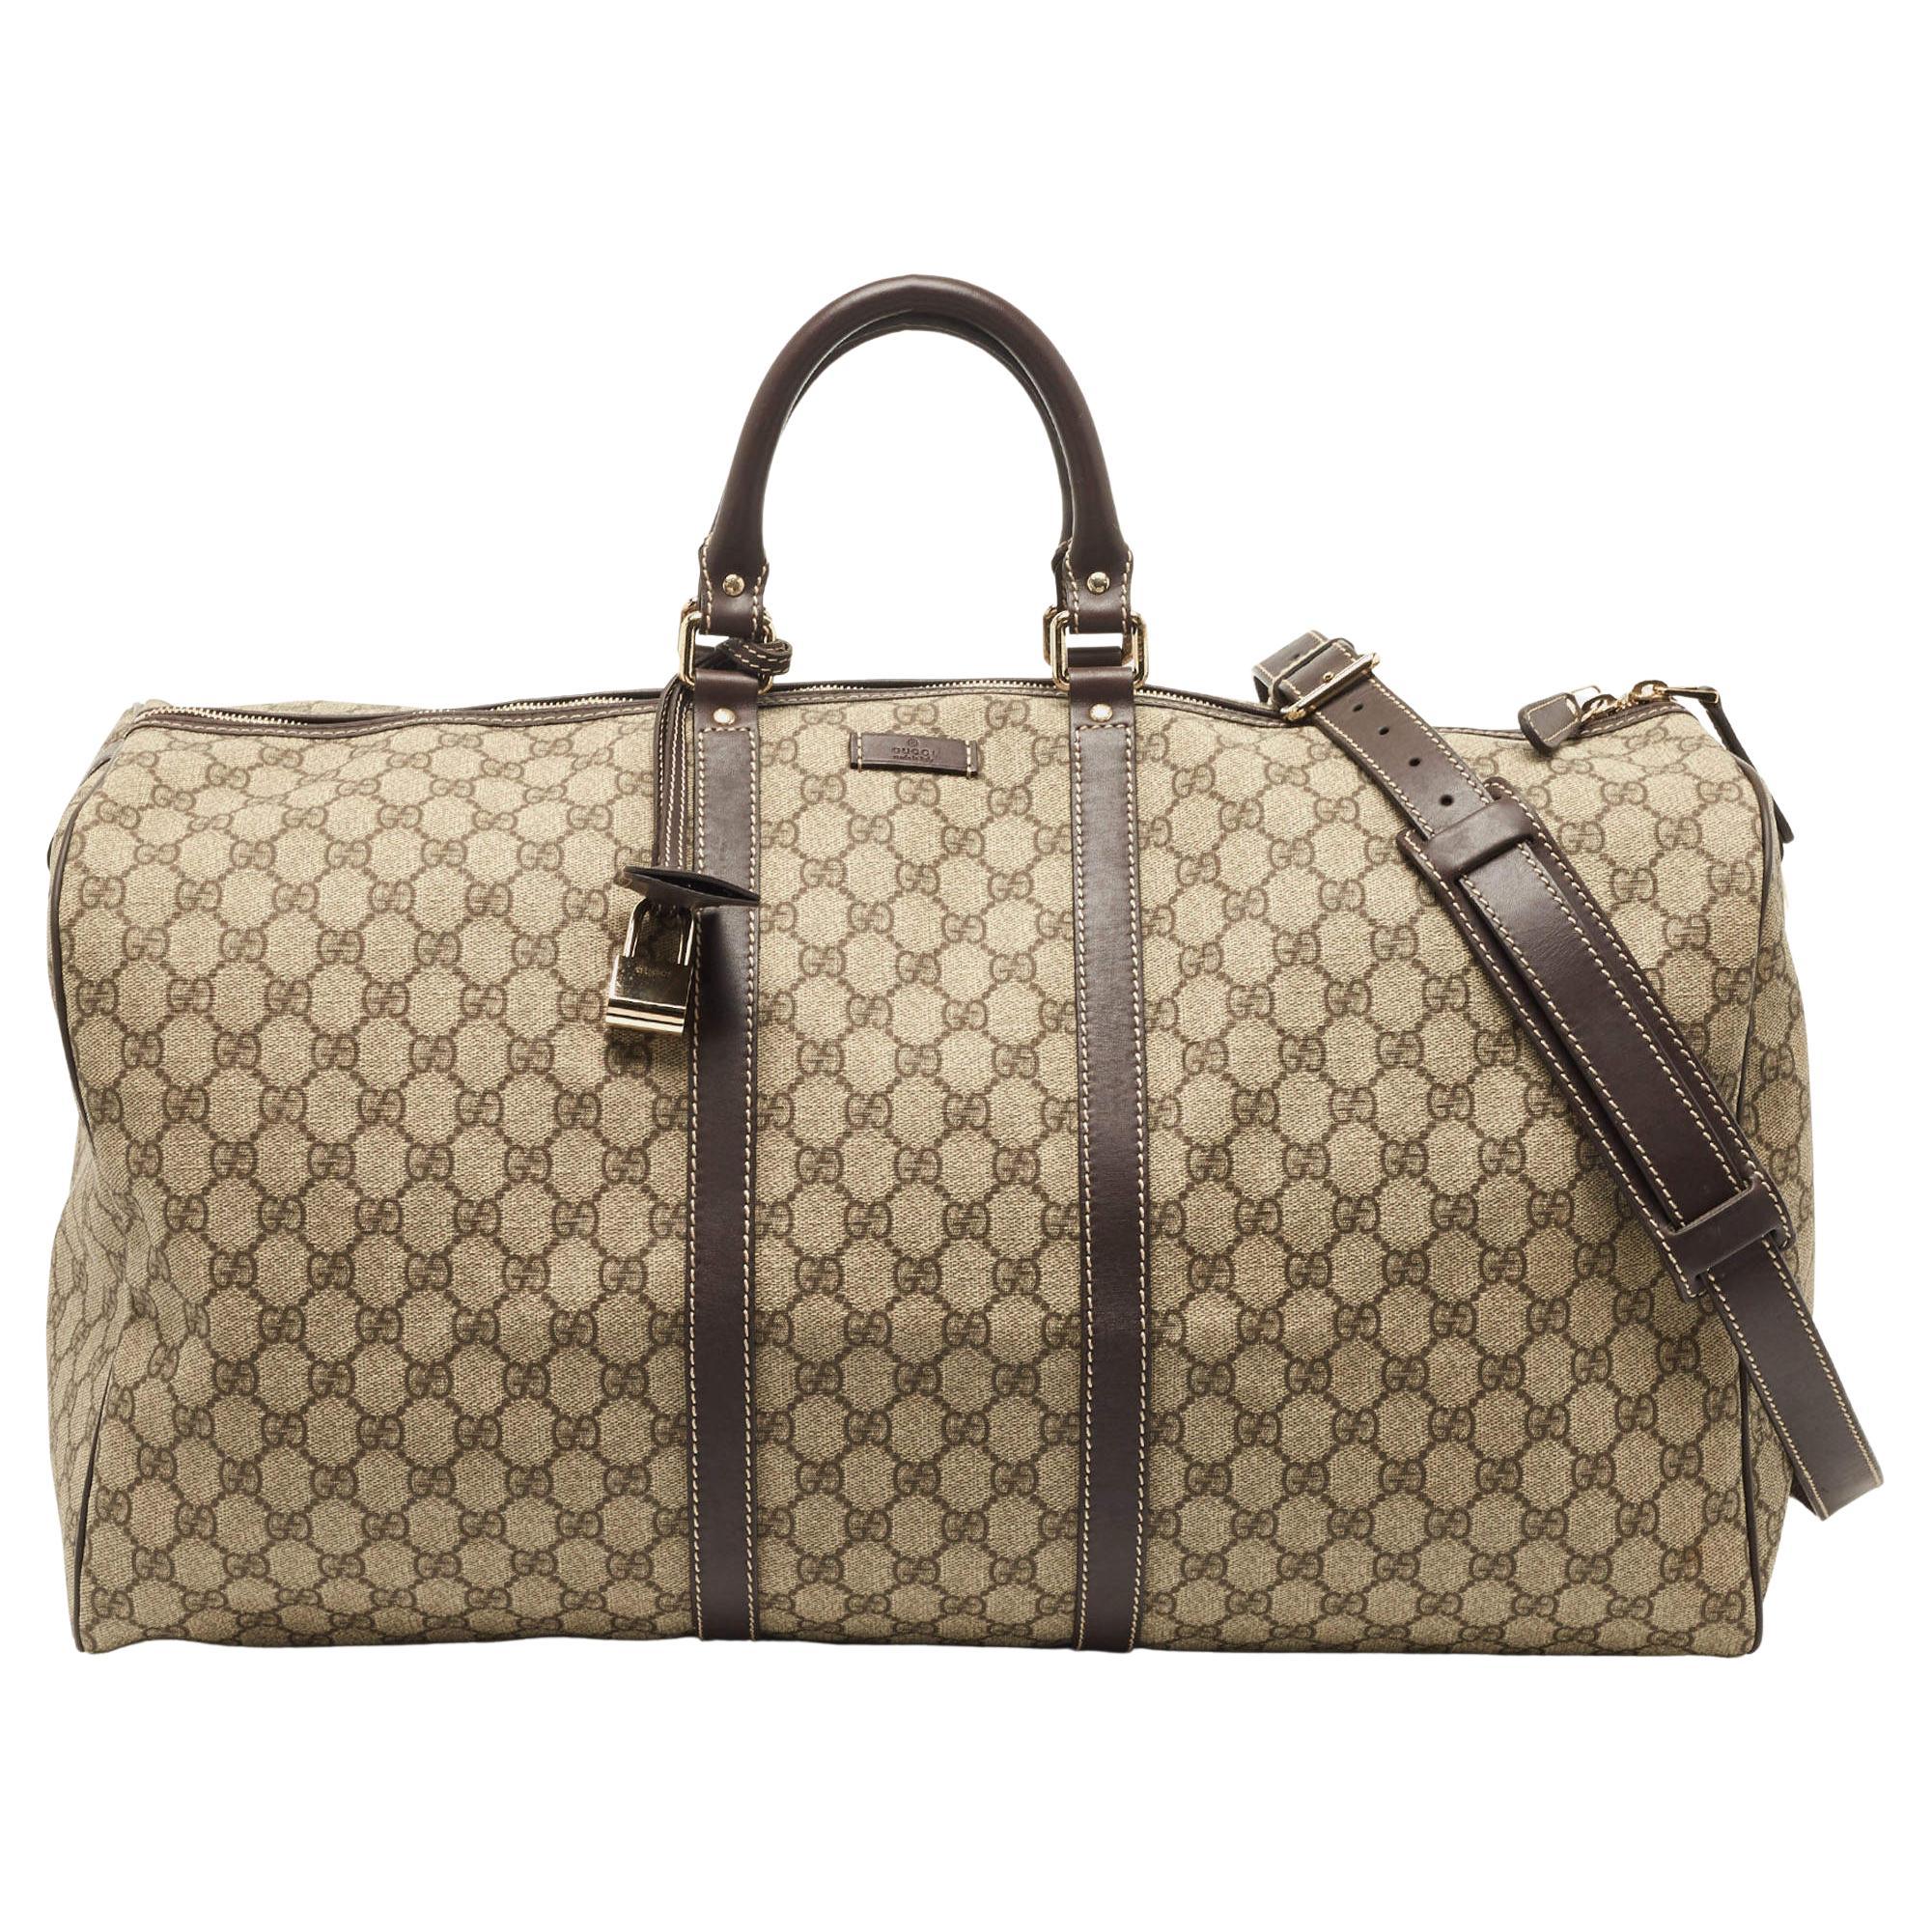 Gucci Beige/Brown GG Supreme Canvas and Leather Carry On Duffel Bag